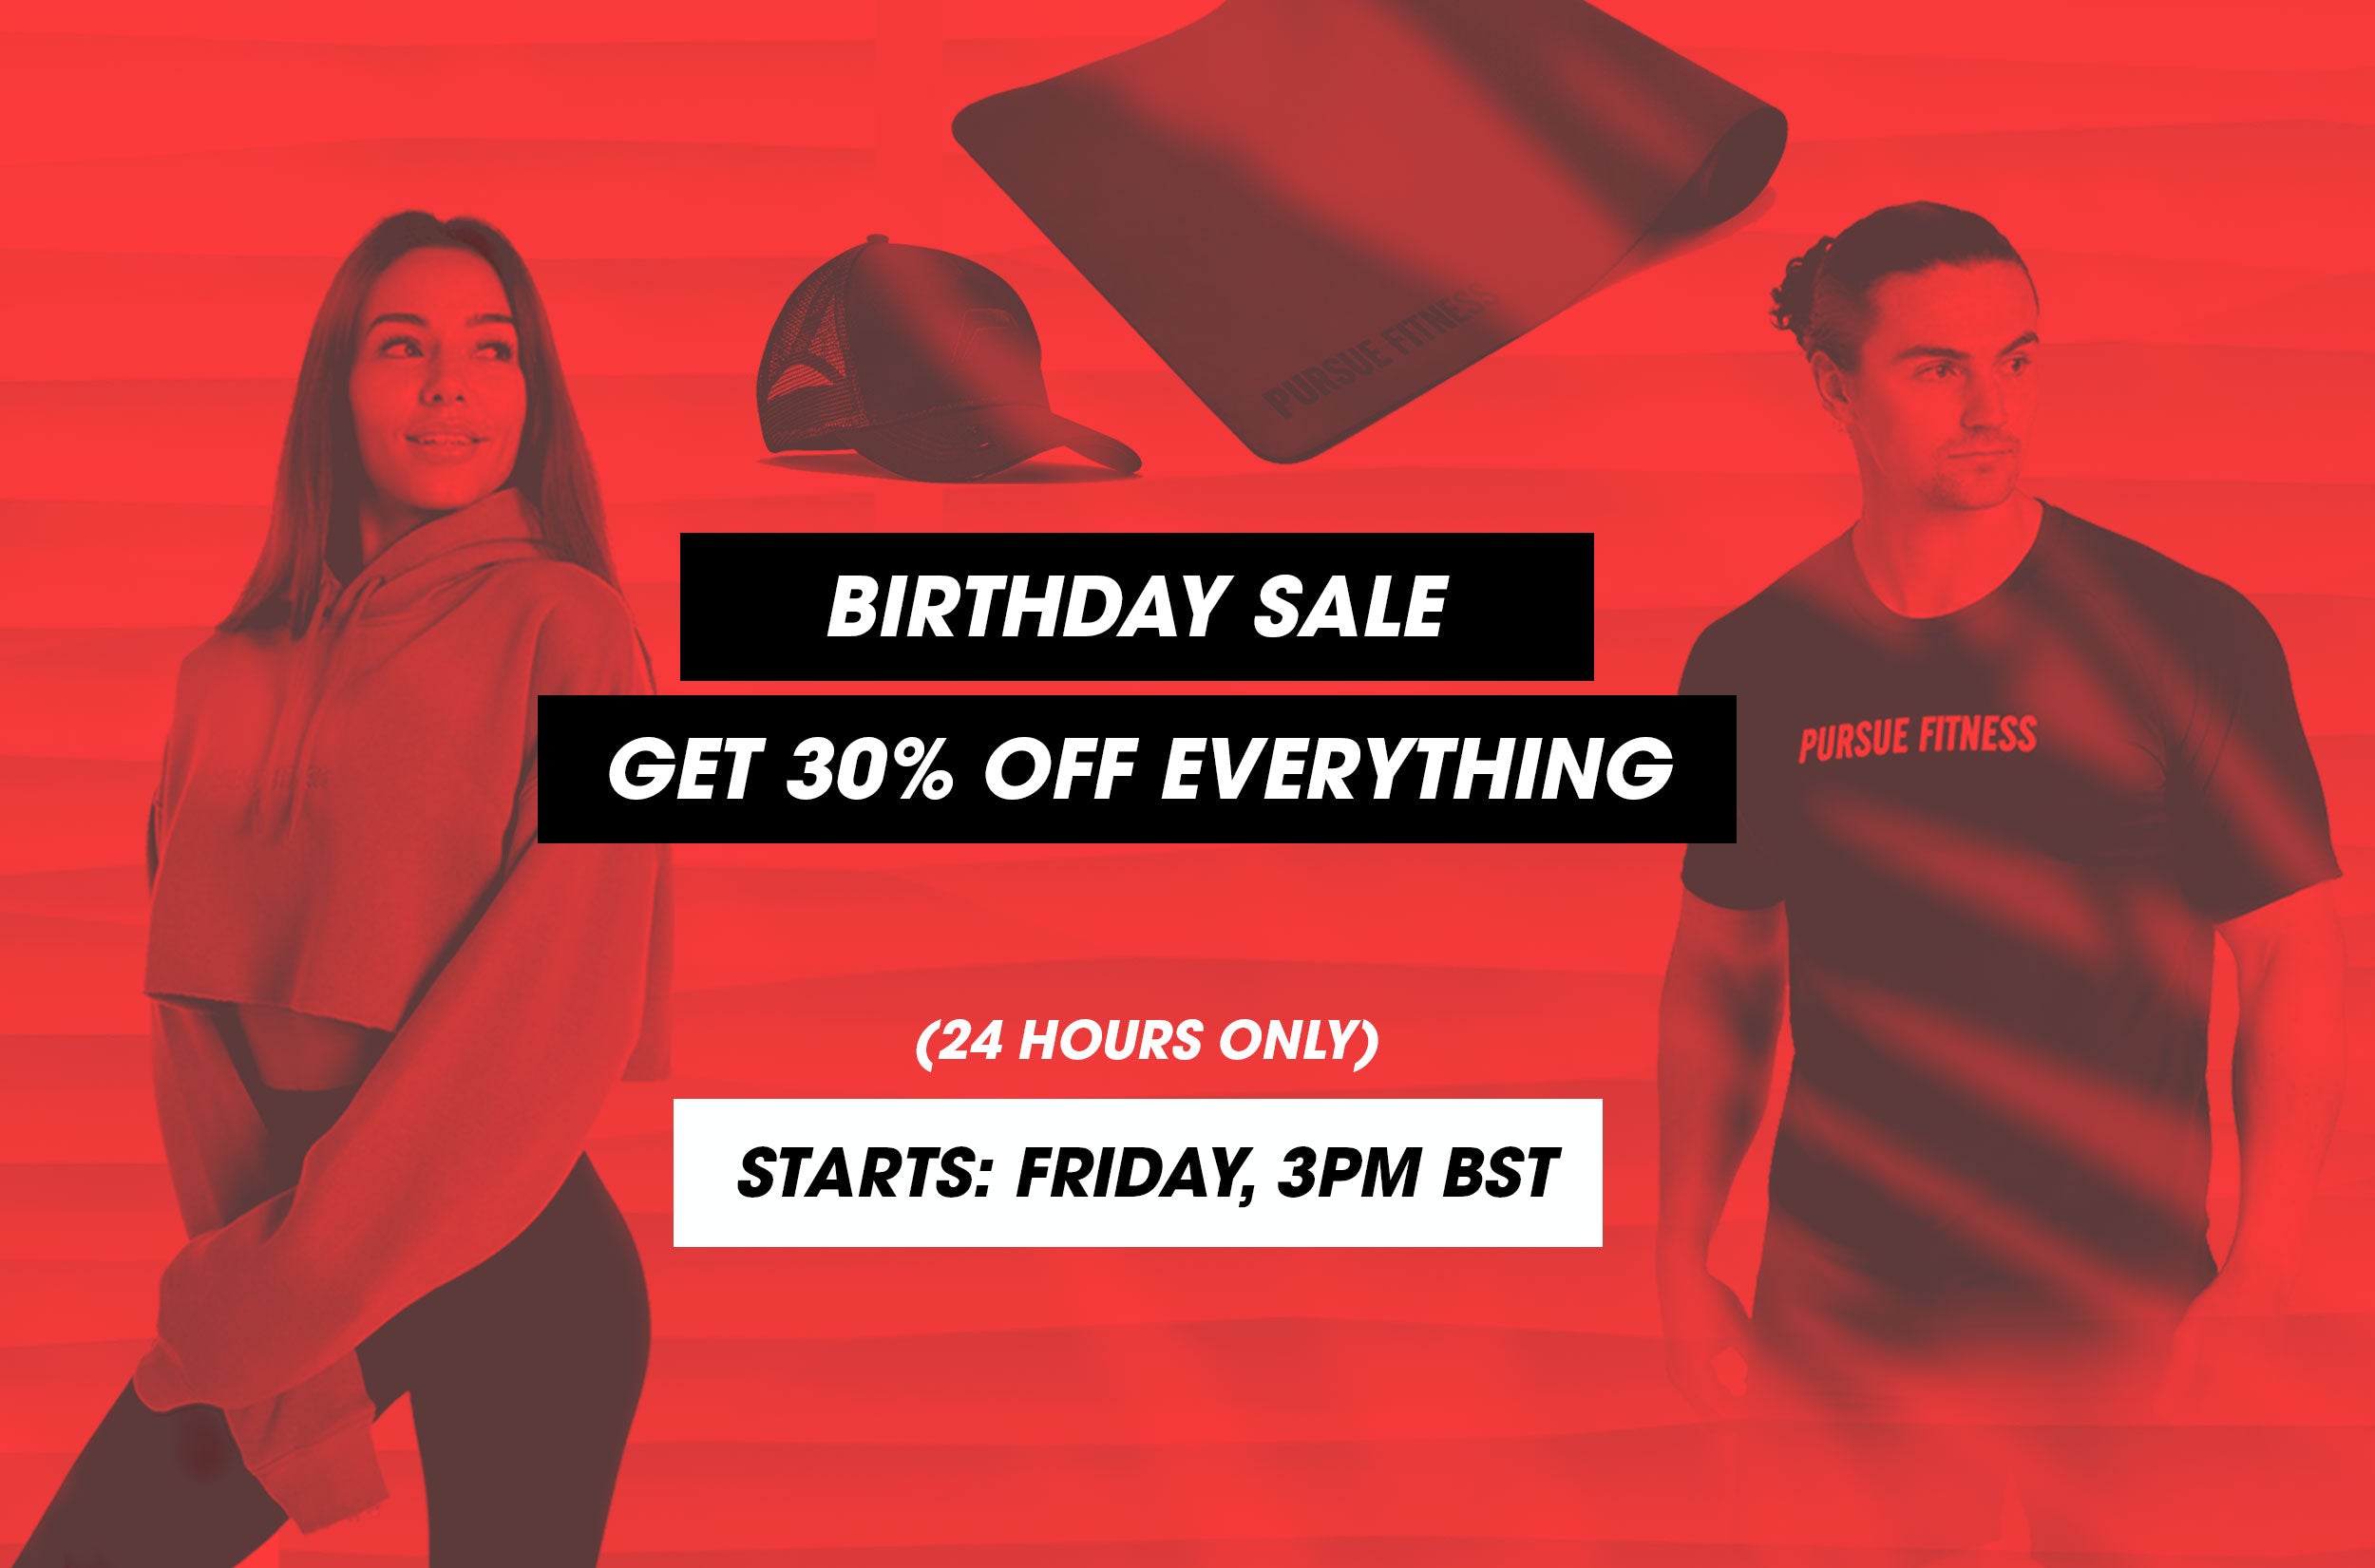 Get ready for 30% off everything.